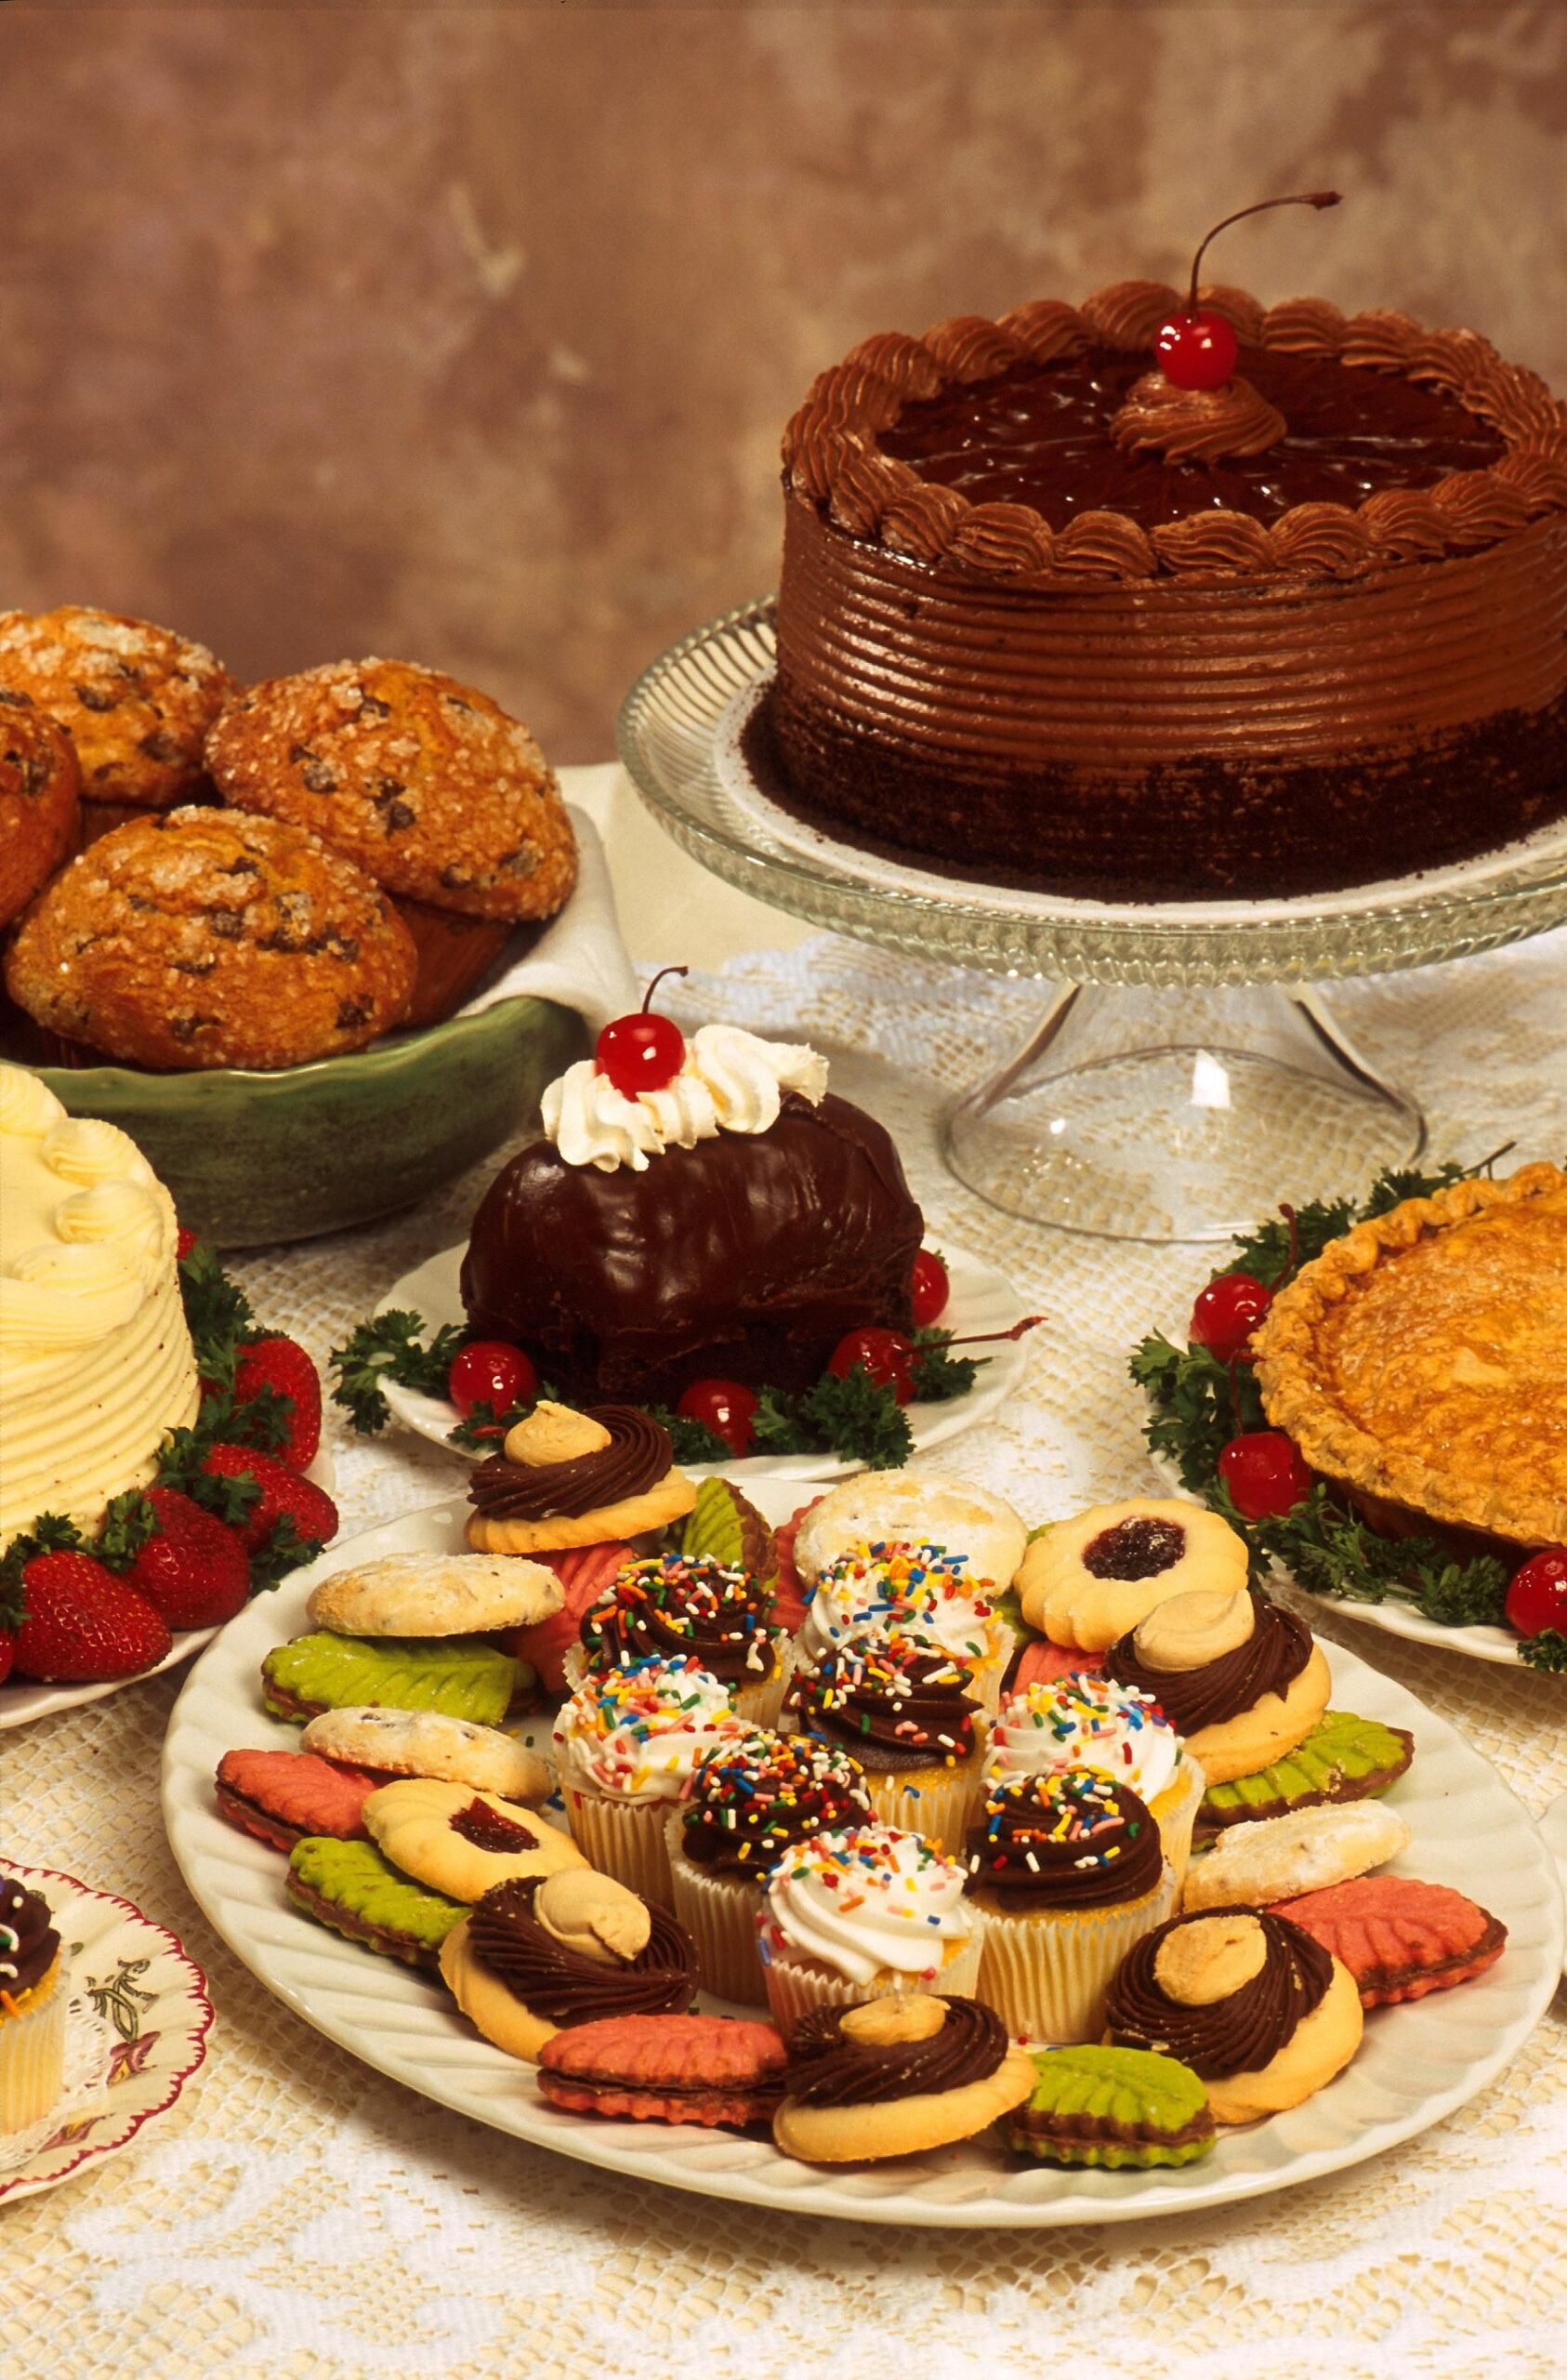 Photograph of a variety of baked goods, including cupcakes, cookies, muffins, a pie, and cake.